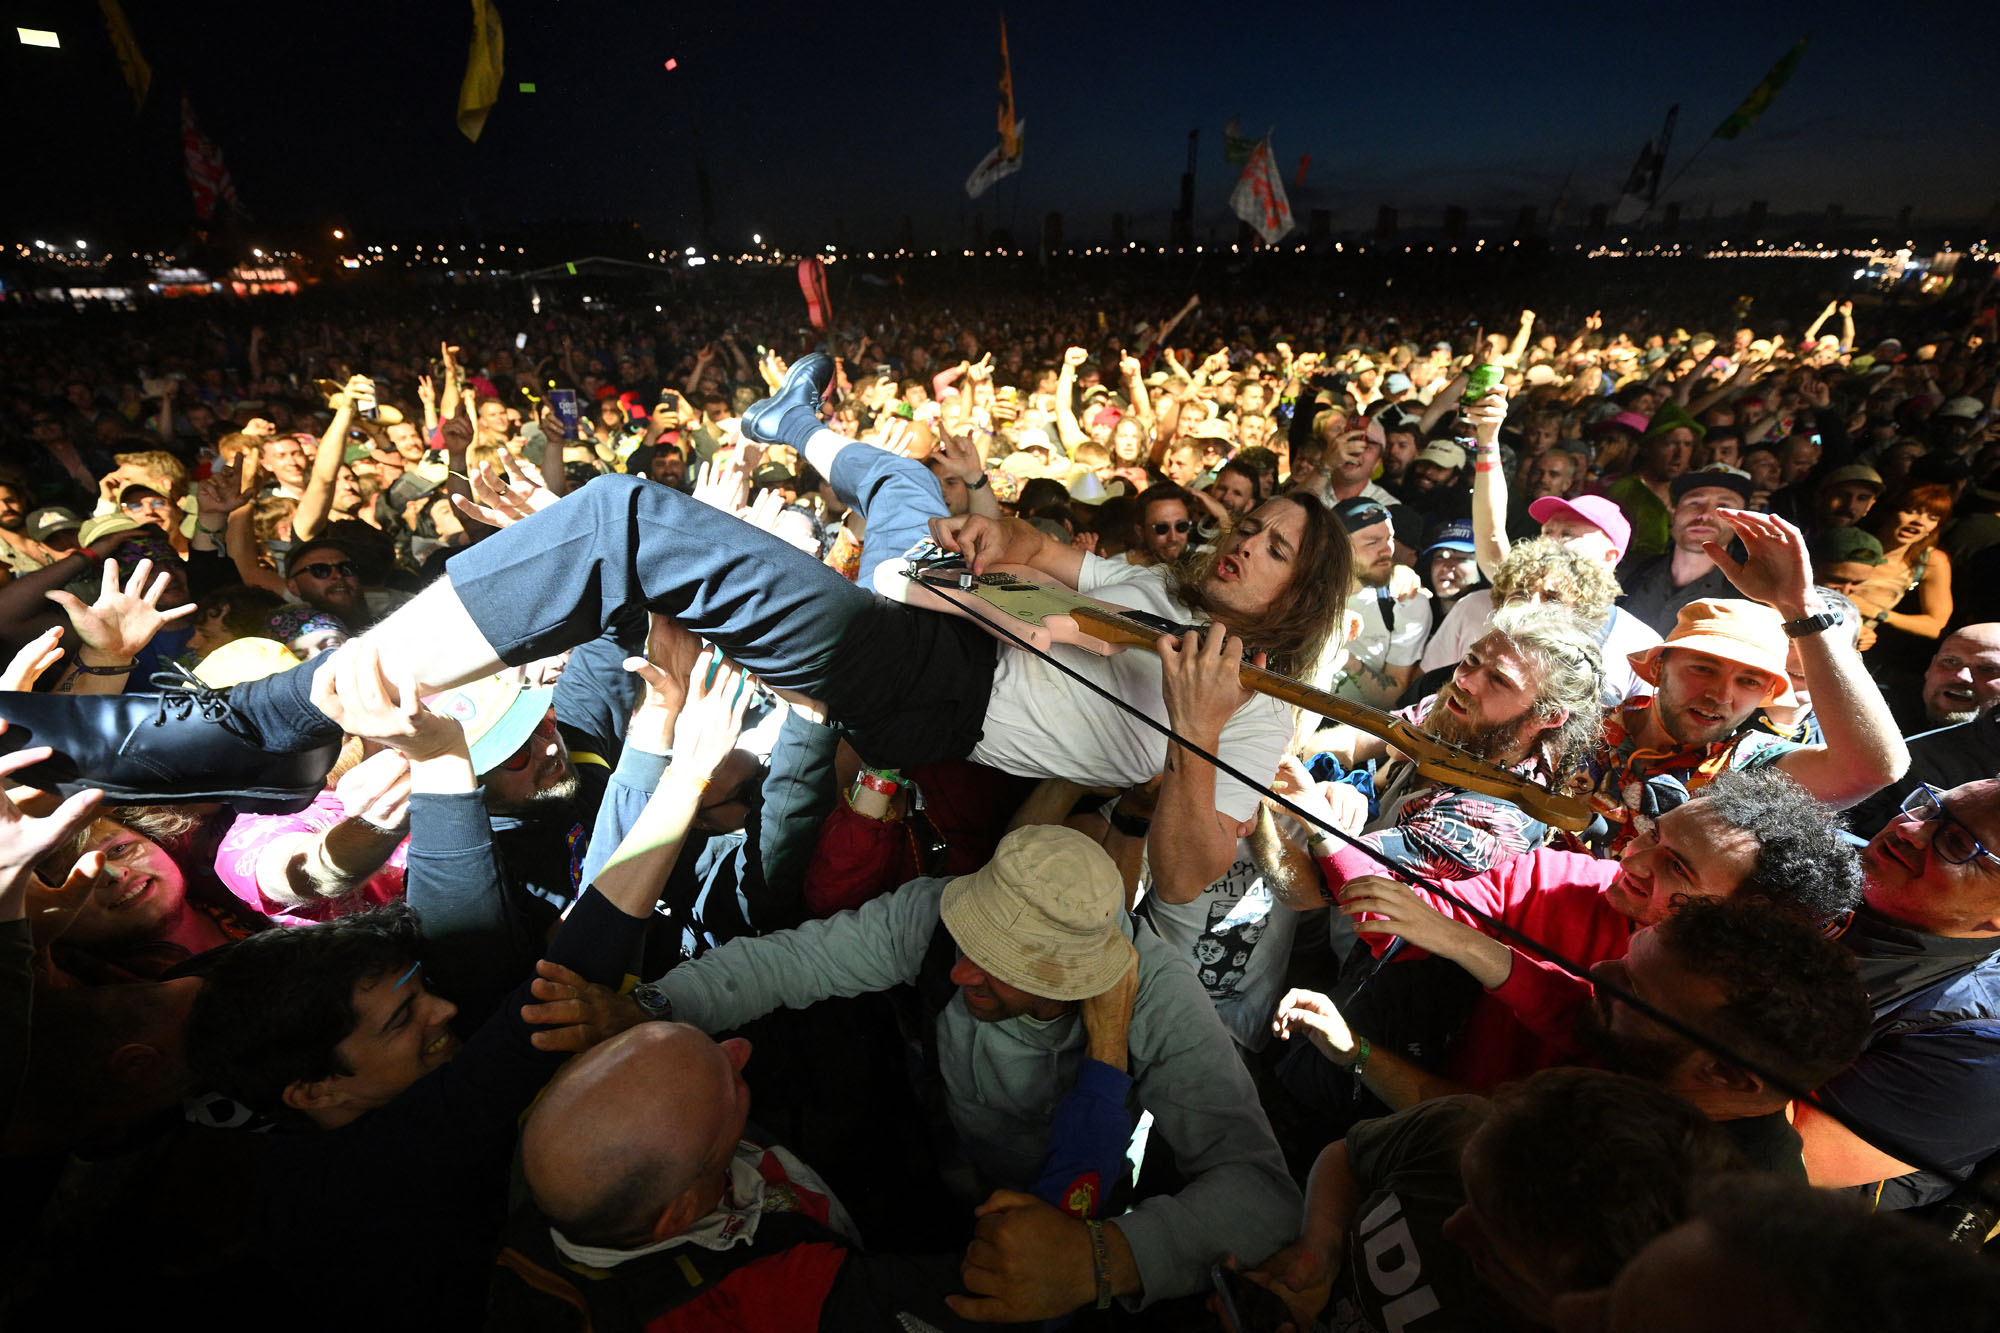 Lee Kiernan of the band Idles jumps into the crowd during their performance